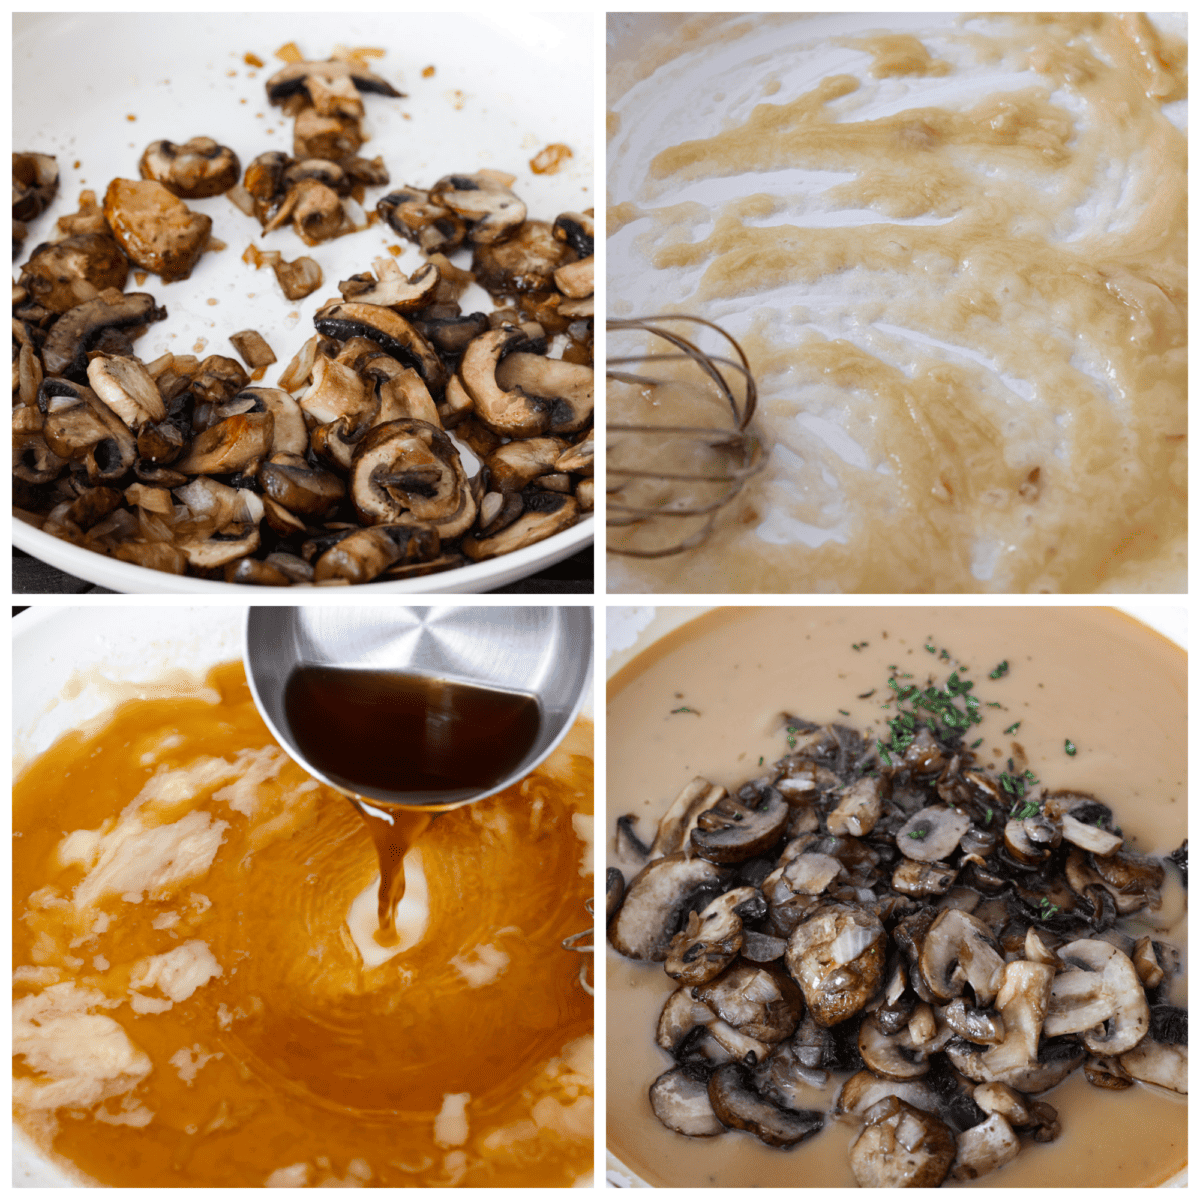 4-photo collage of the gravy ingredients being mixed together.